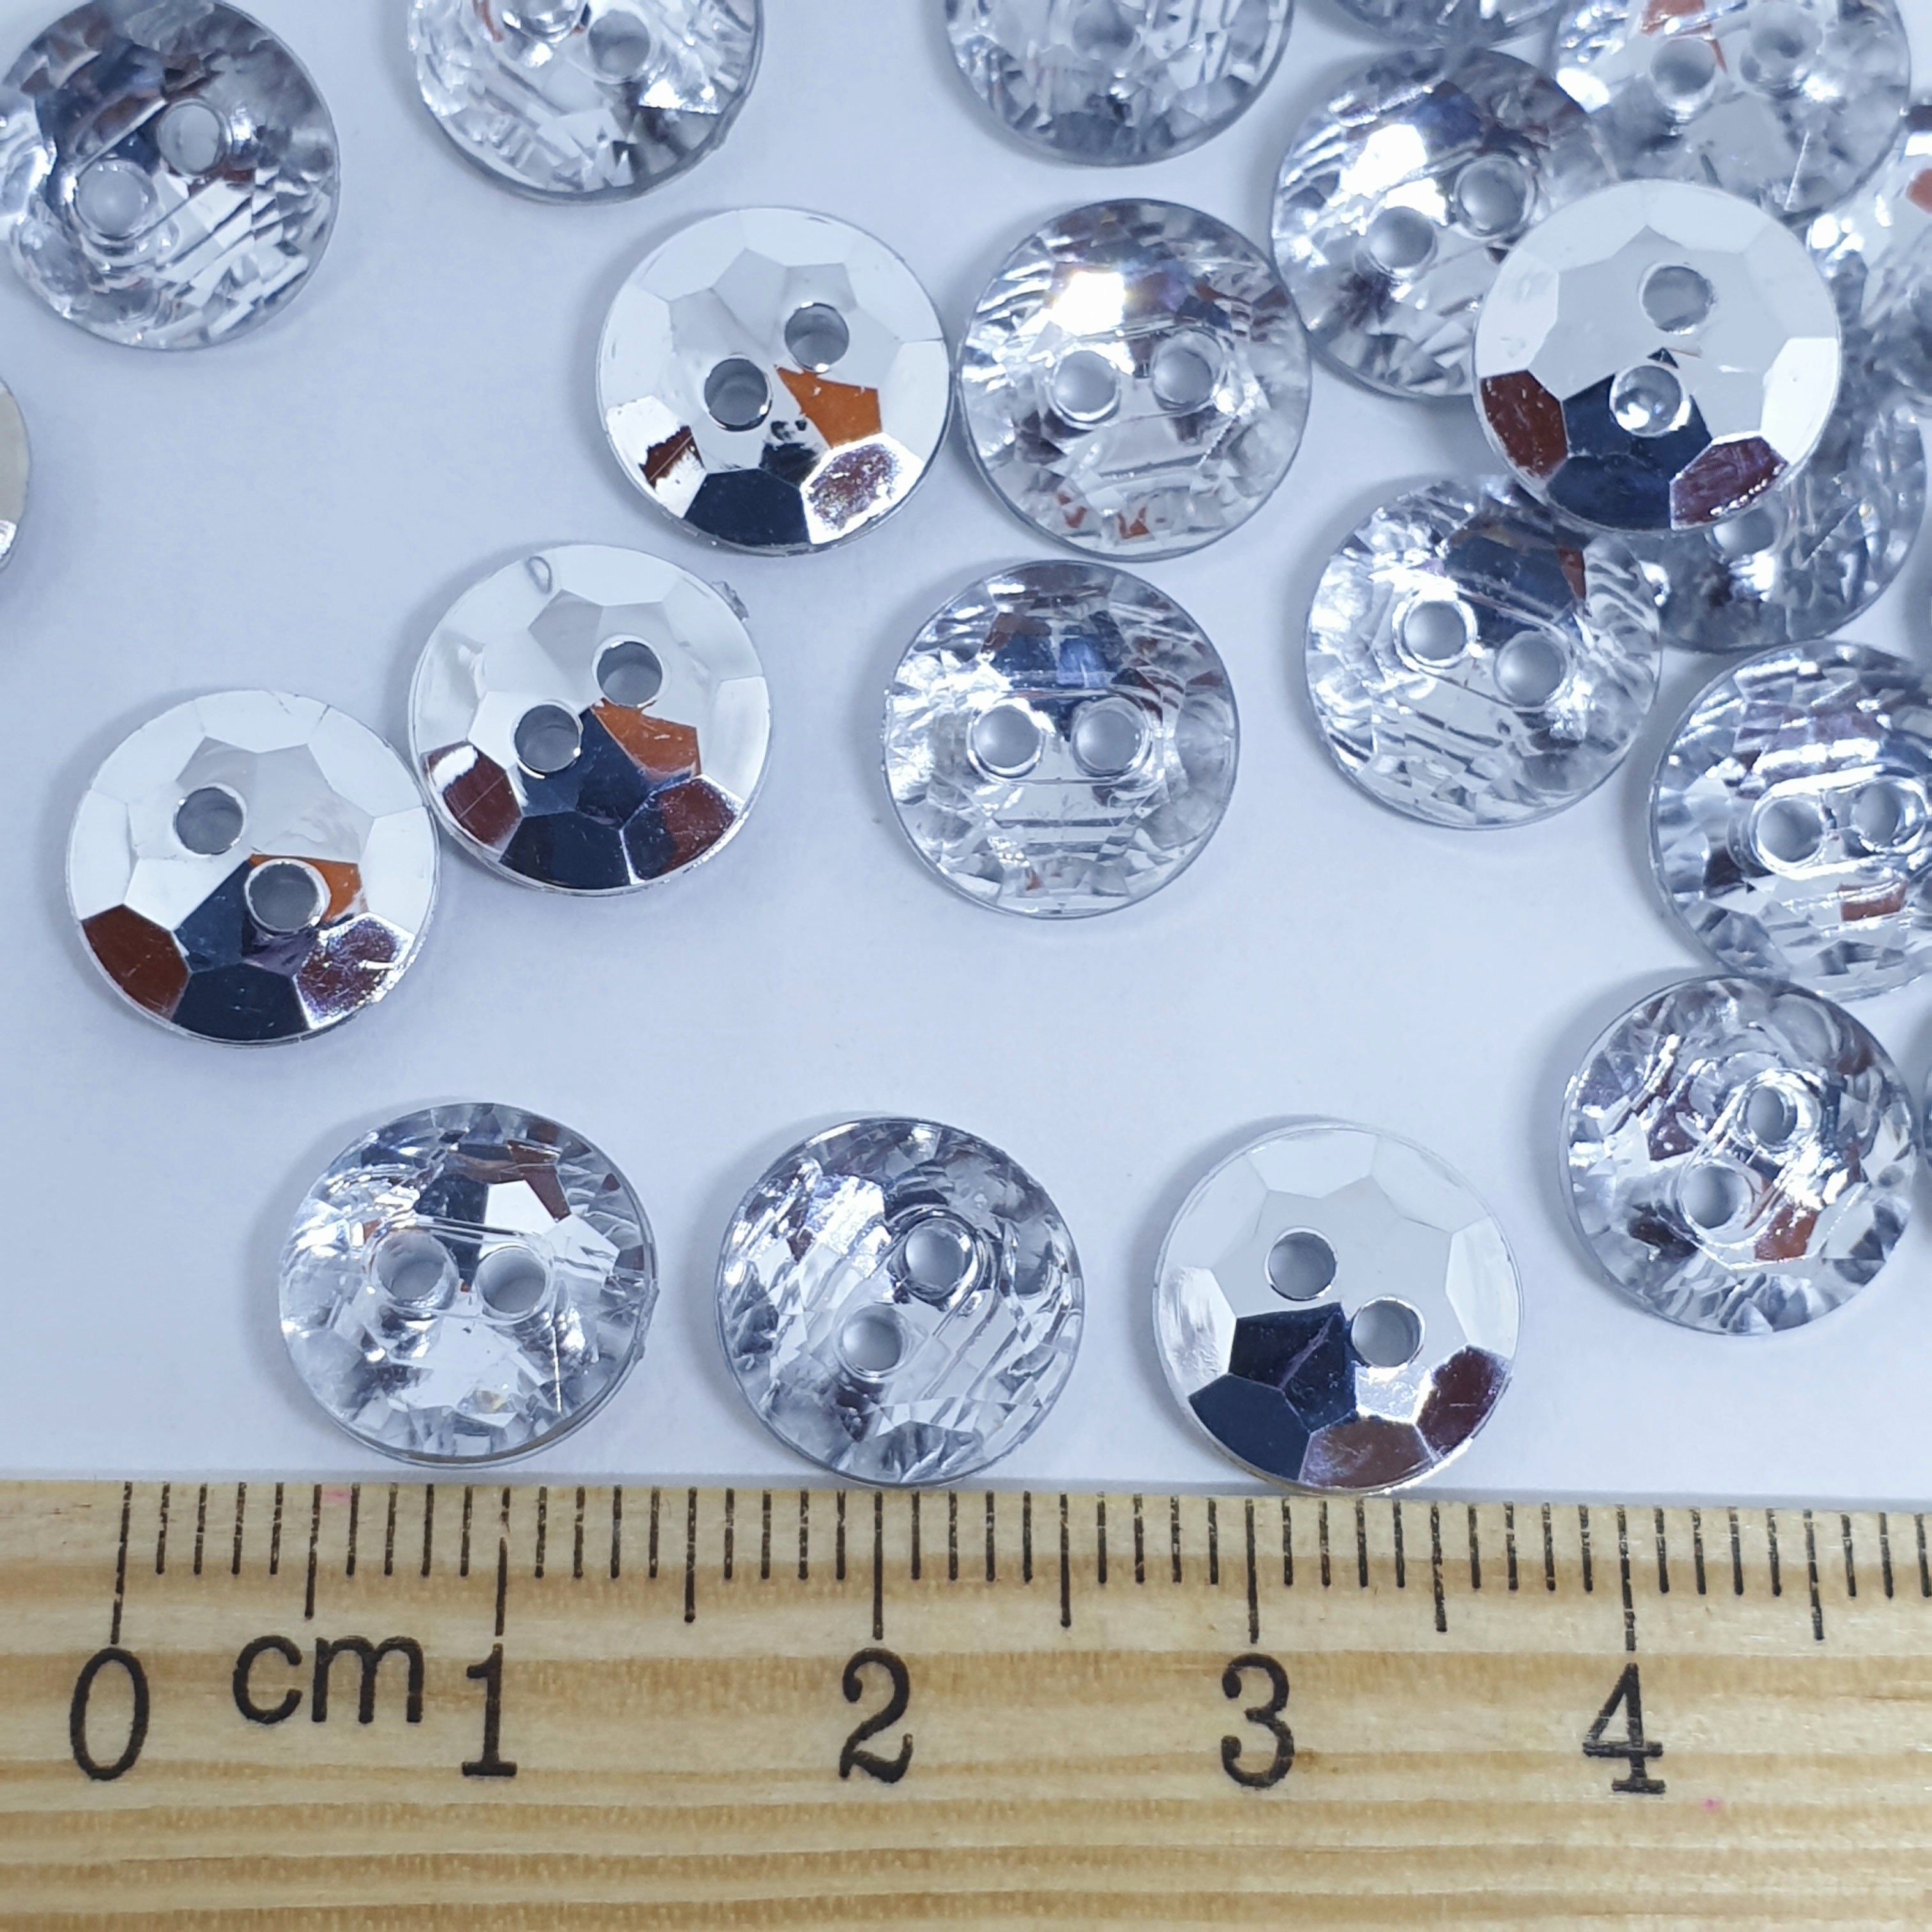 MajorCrafts 48pcs 10mm Crystal Clear Faceted Acrylic 2 Holes Small Round Sewing Buttons